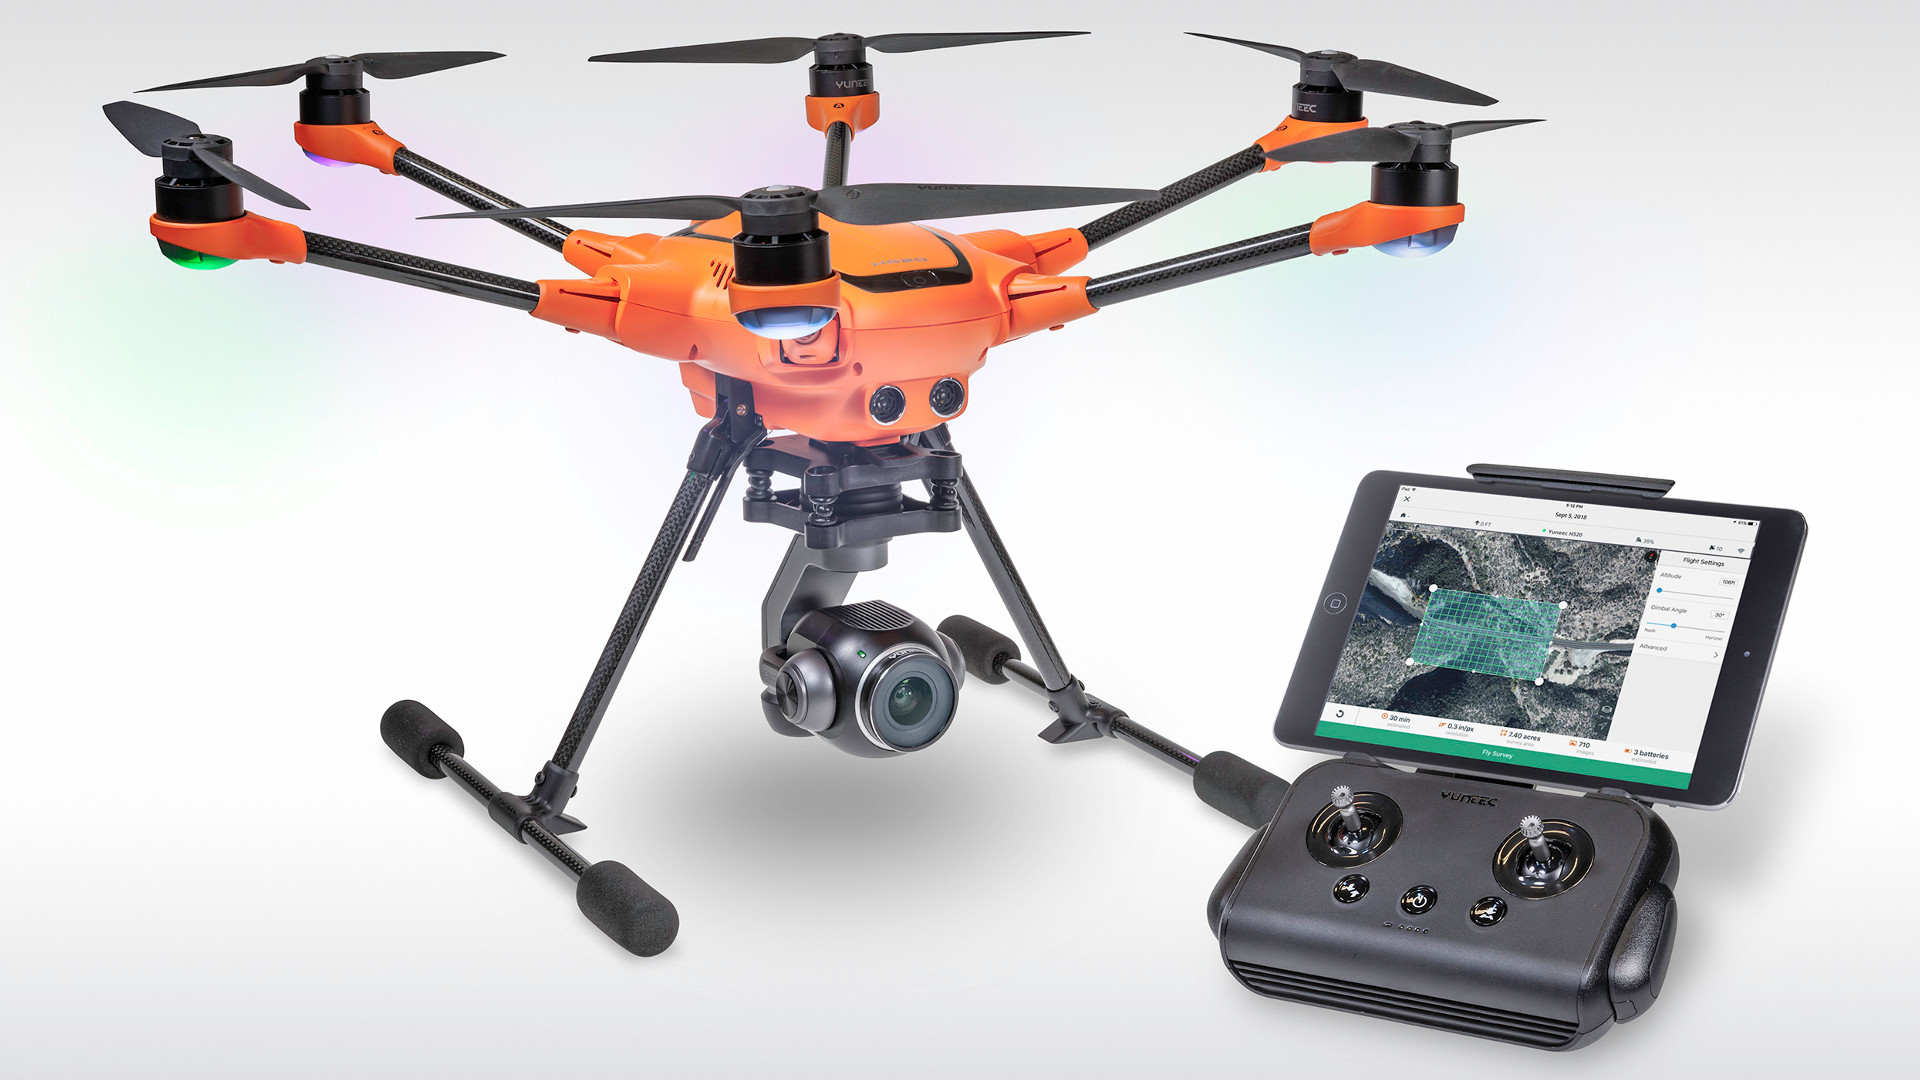 Yuneec and 3DR partnership with H520 commercial drone at interdrone 2018